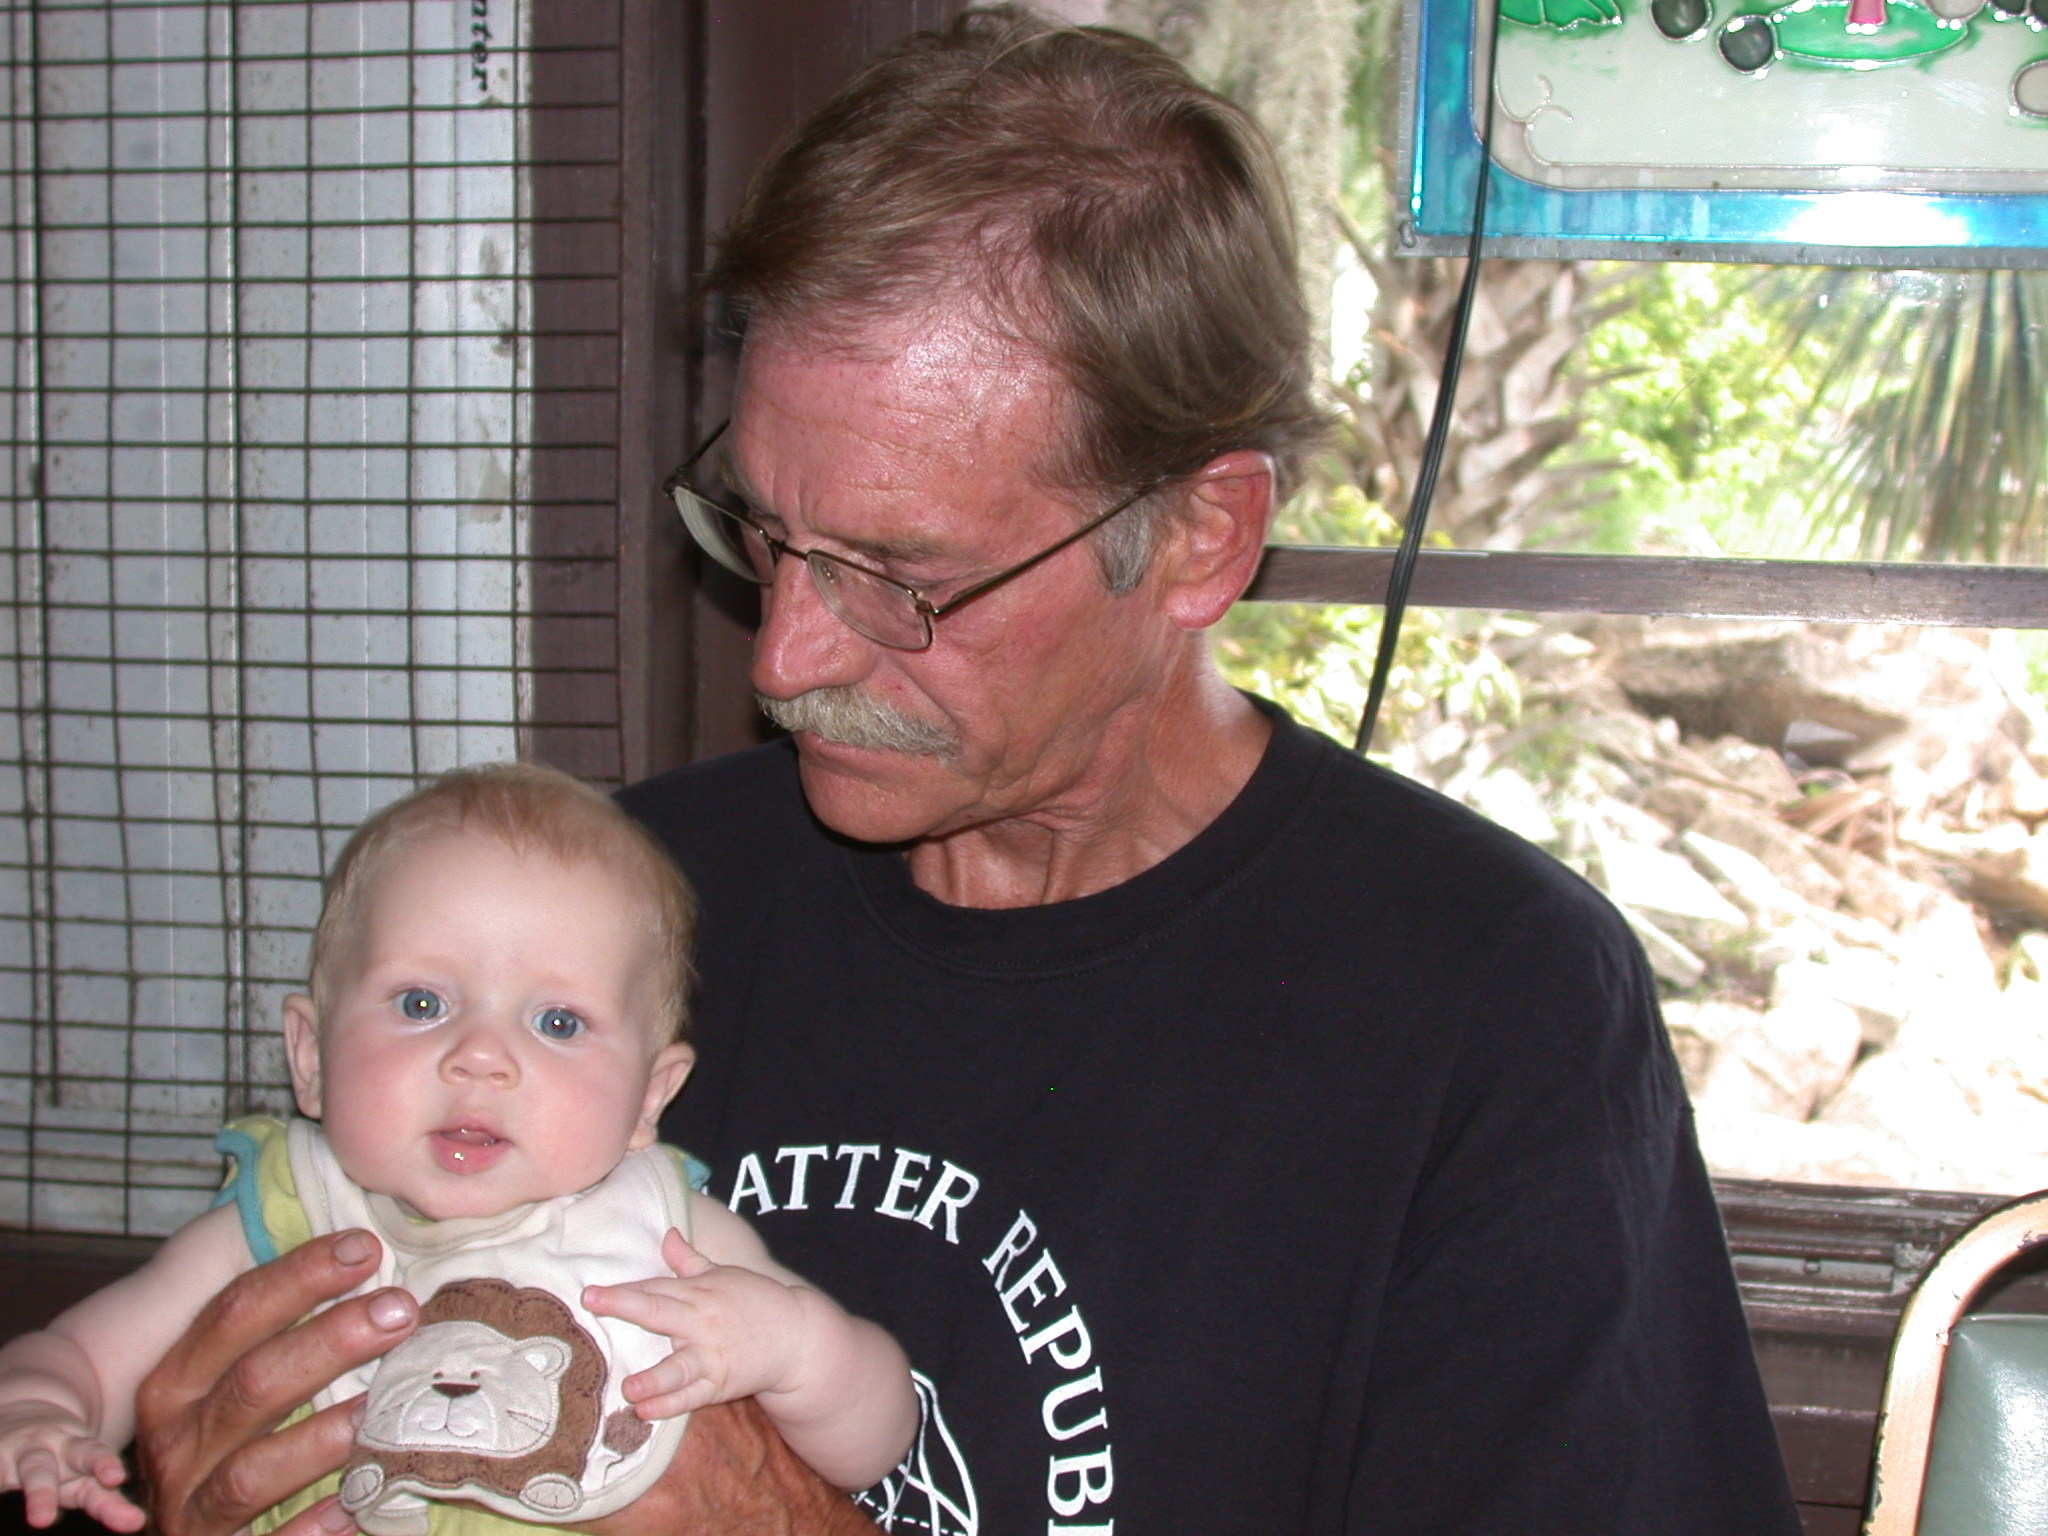 Larry, holding his first grandchild. We will miss you.